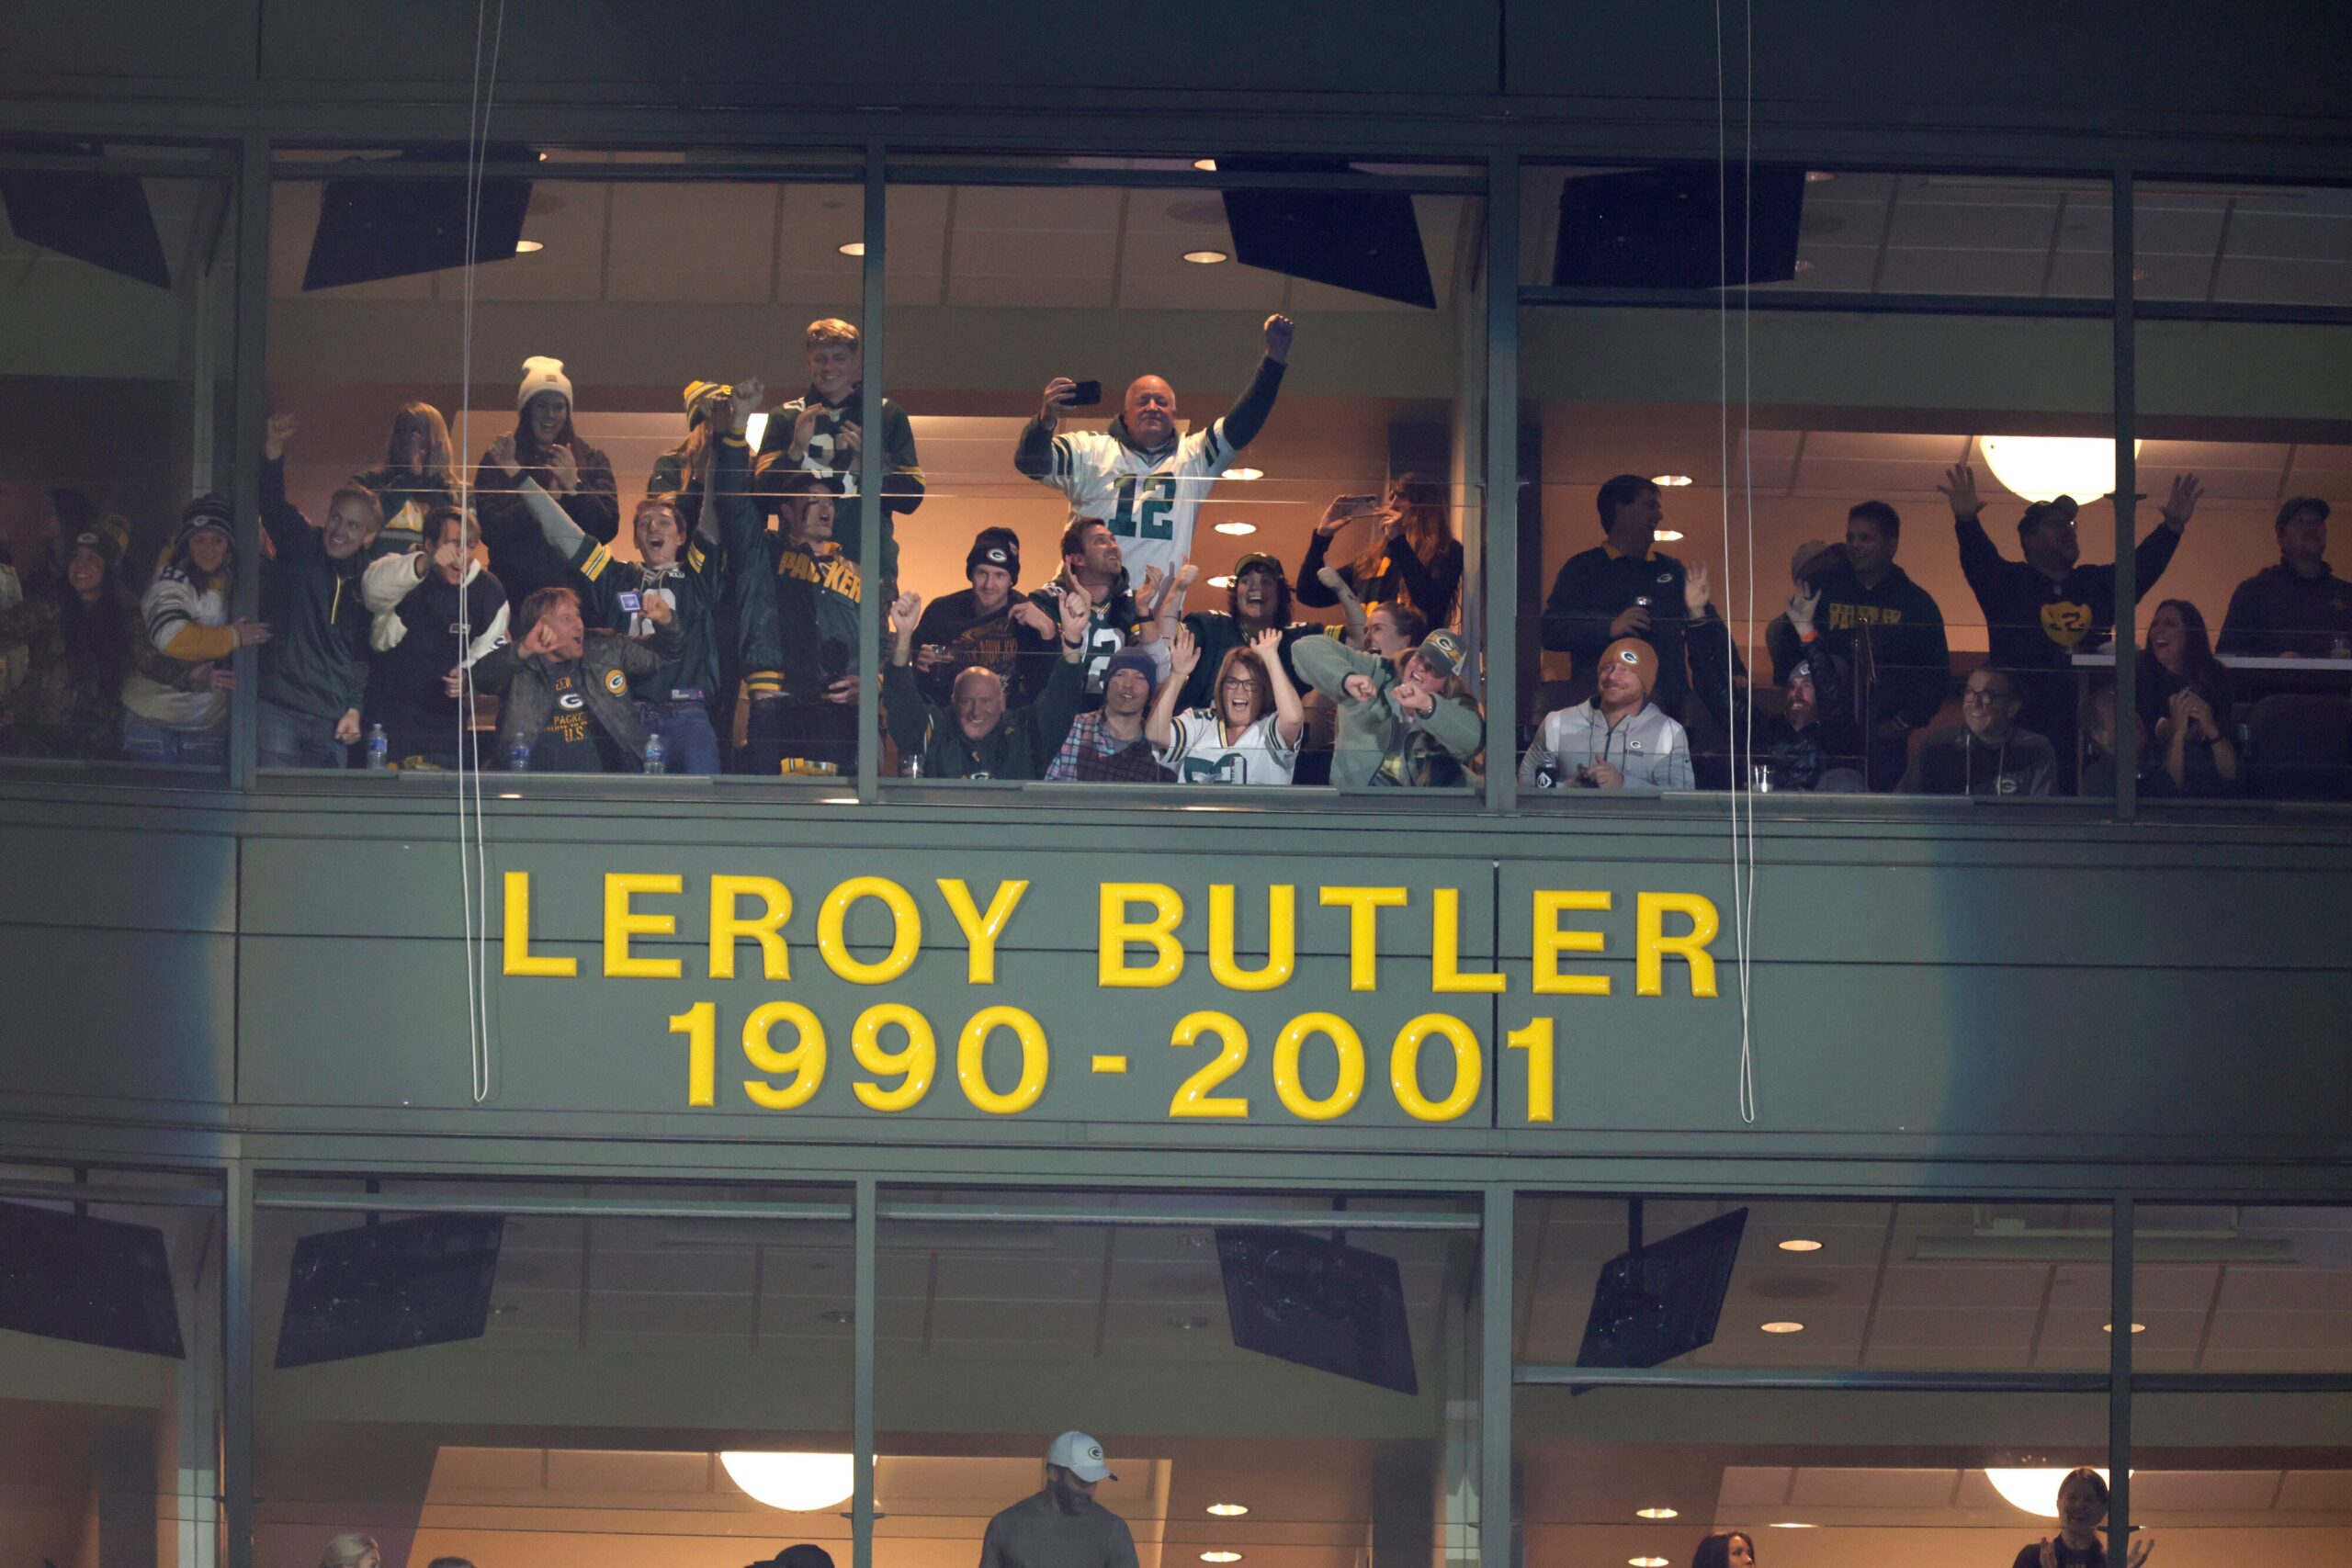 LeRoy Butler's name in Lambeau Field is shown during his celebration, showing he played for the Packers from 1990-2001.